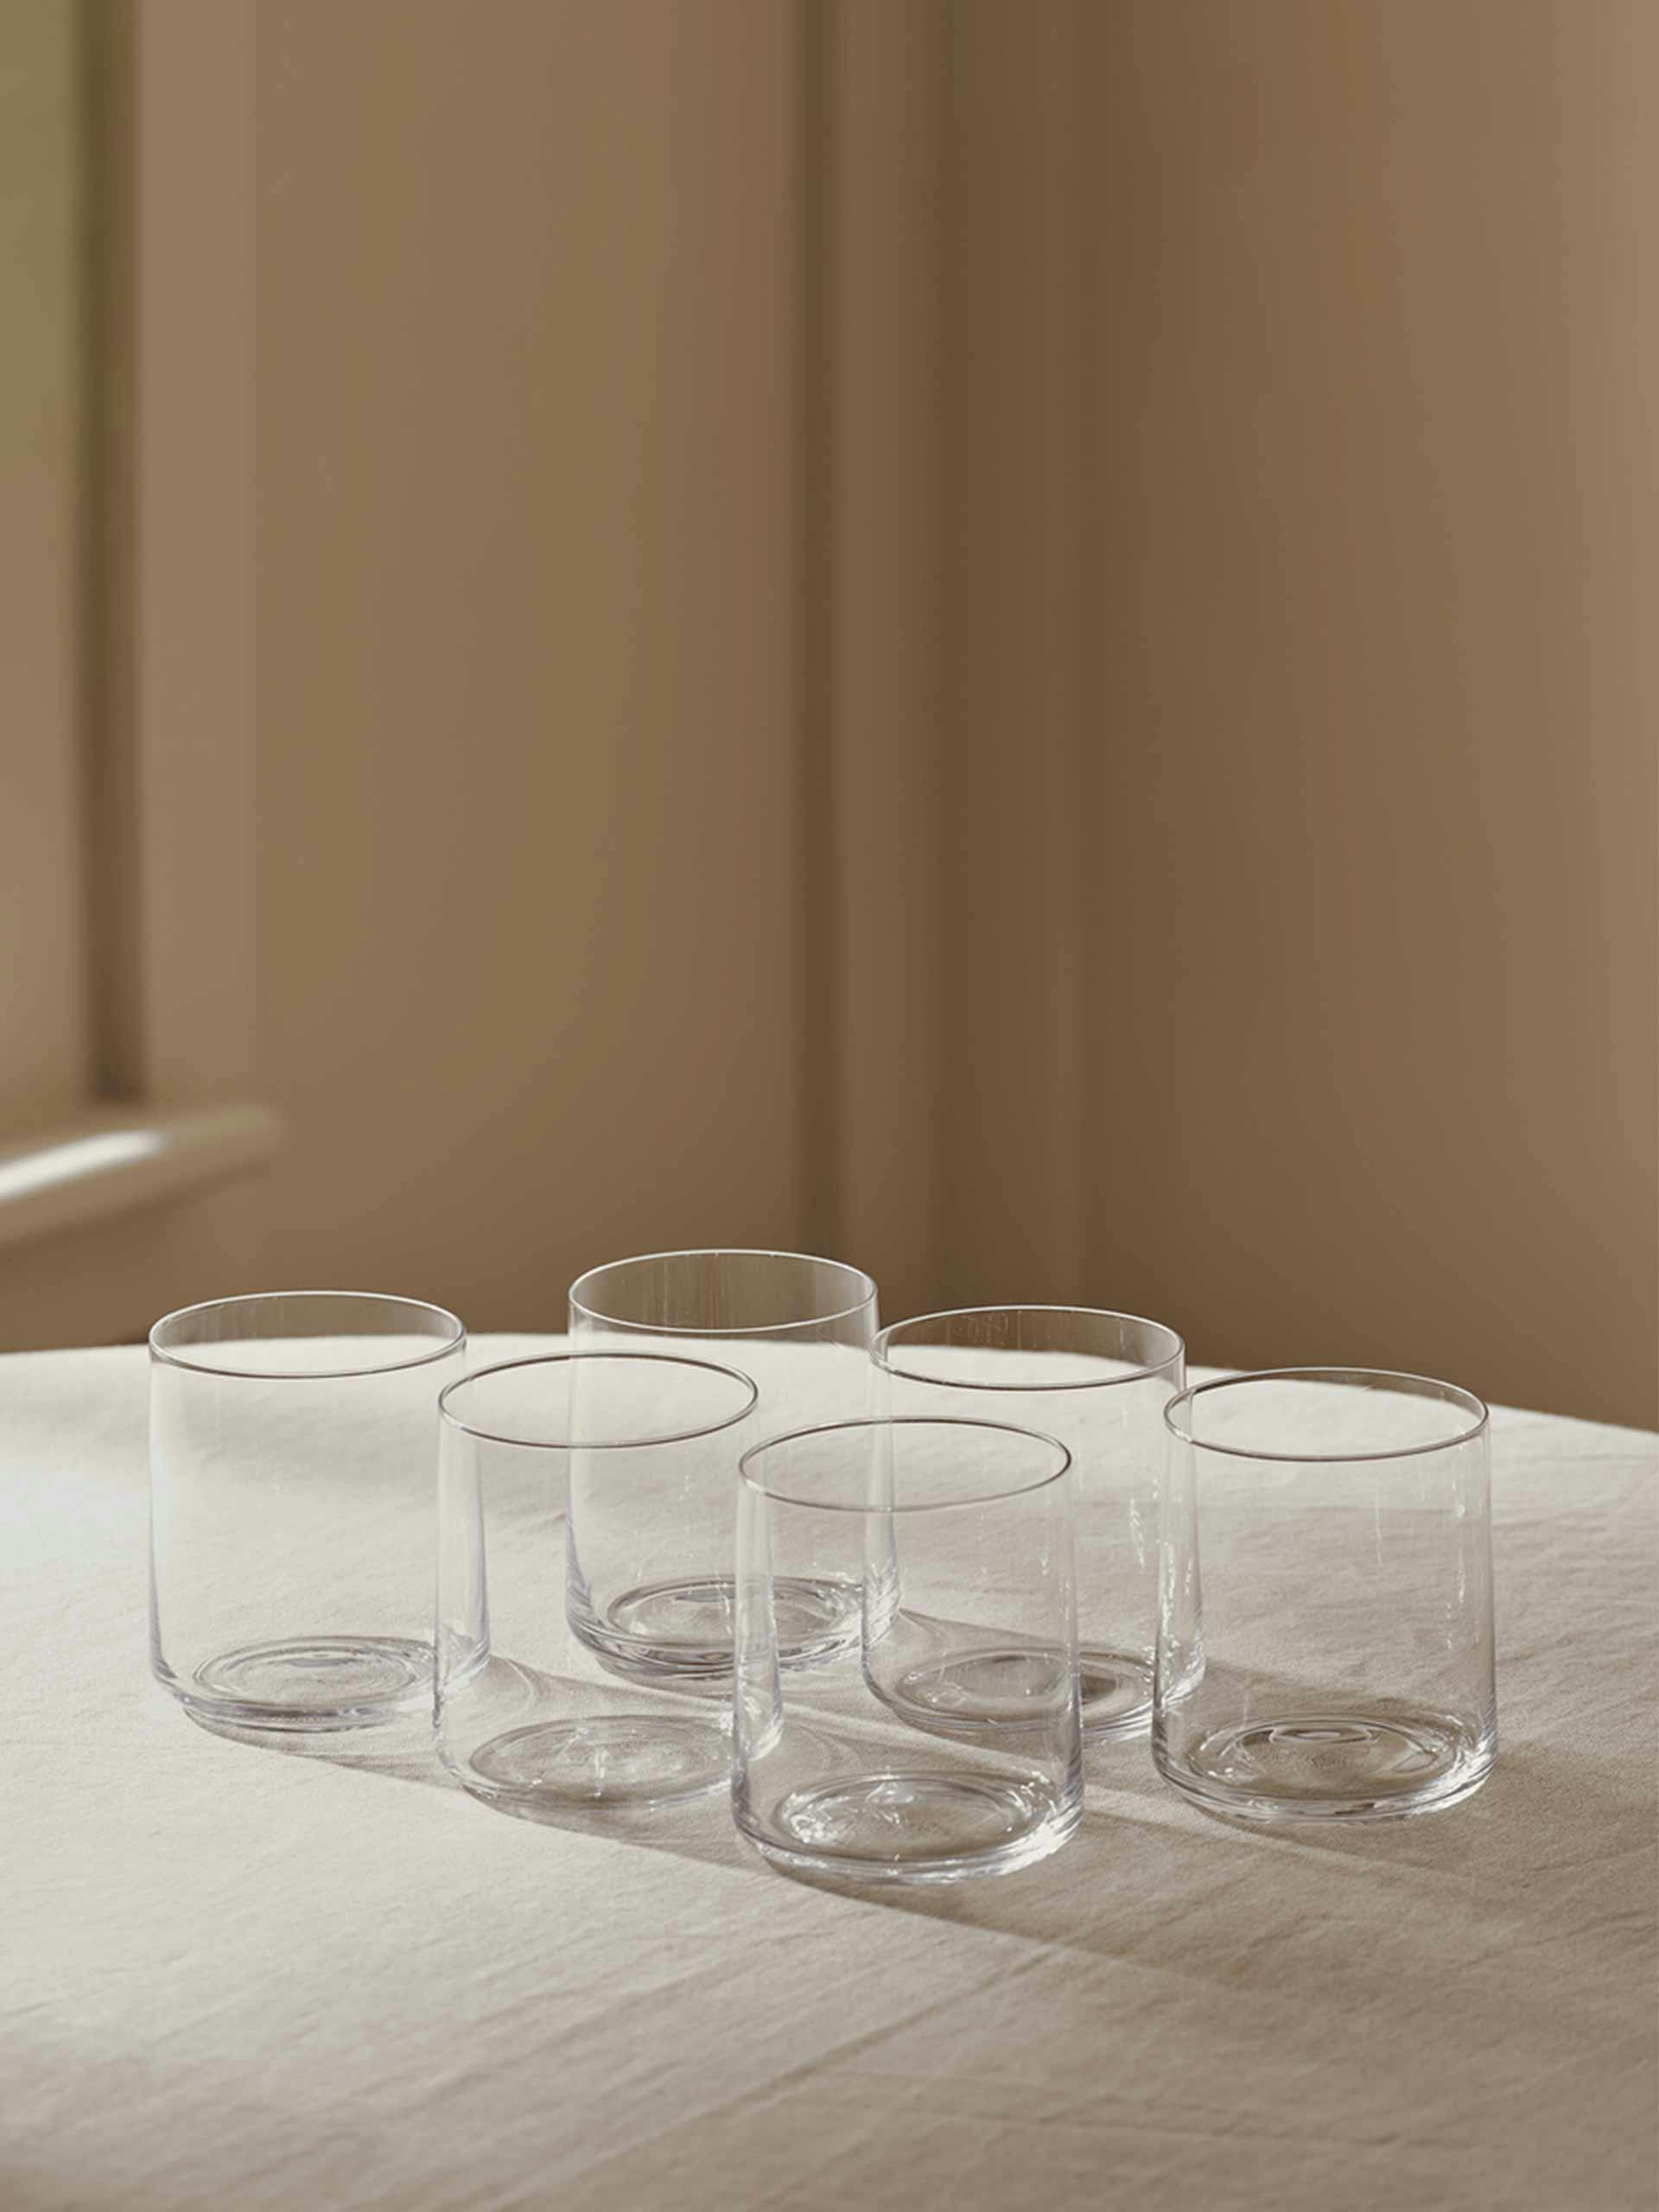 Hoxton small water glass (set of 6)